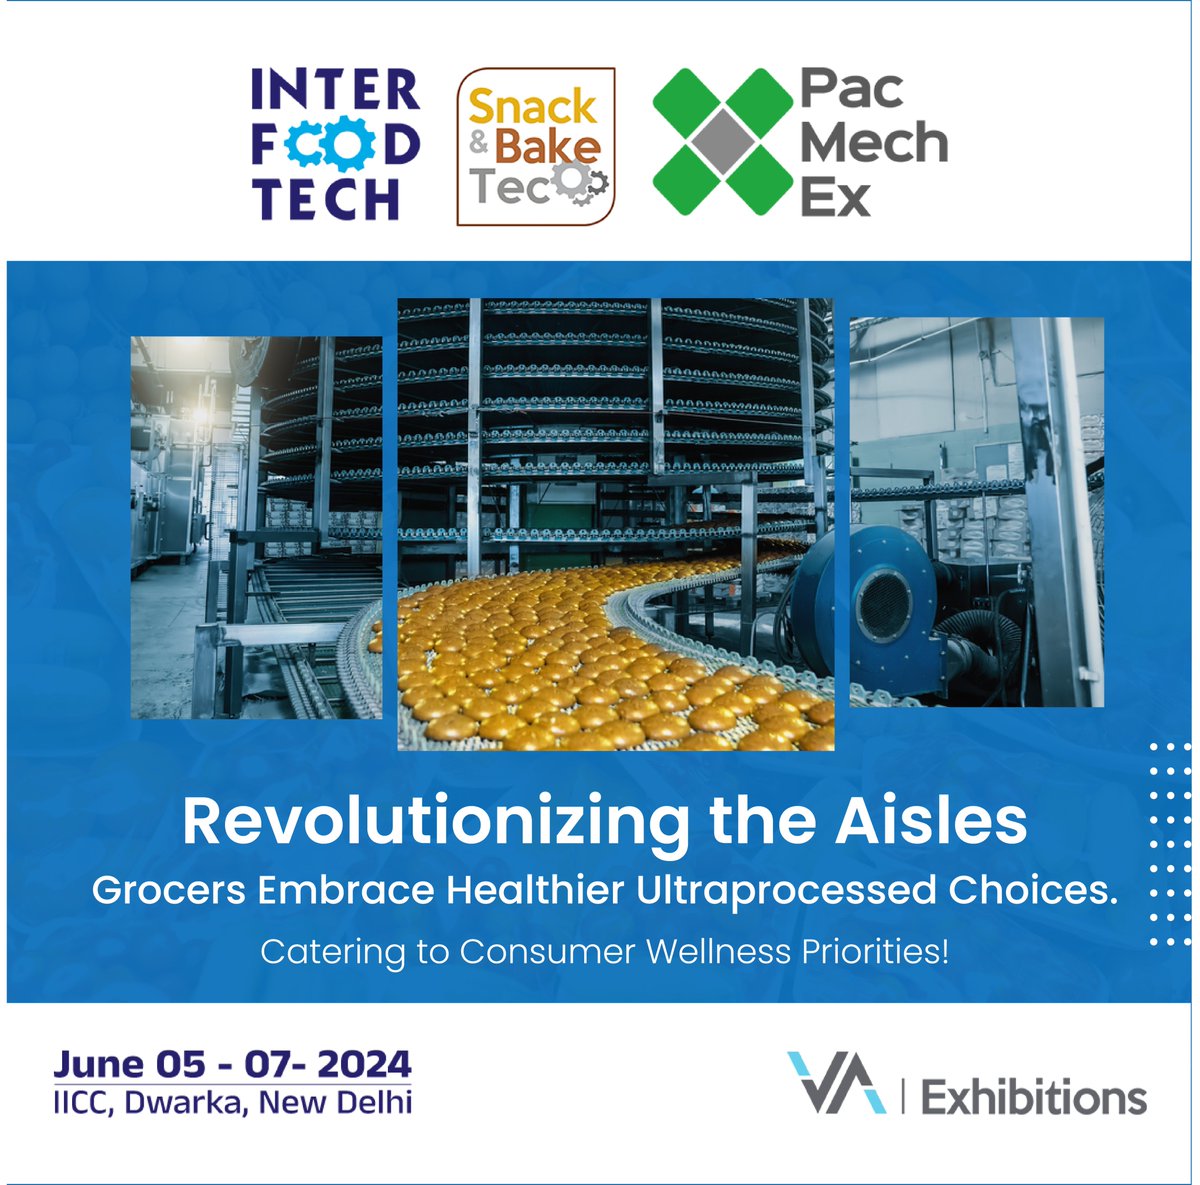 Explore how leading grocery chains are adapting to consumer preferences for healthier ultra-processed options. Showcase your technologies and innovations in this space at InterFoodTech and join the revolution!
#InterFoodTech2024 #PacMechex2024 #SnackBakeTec2024 #GroceryInnovation